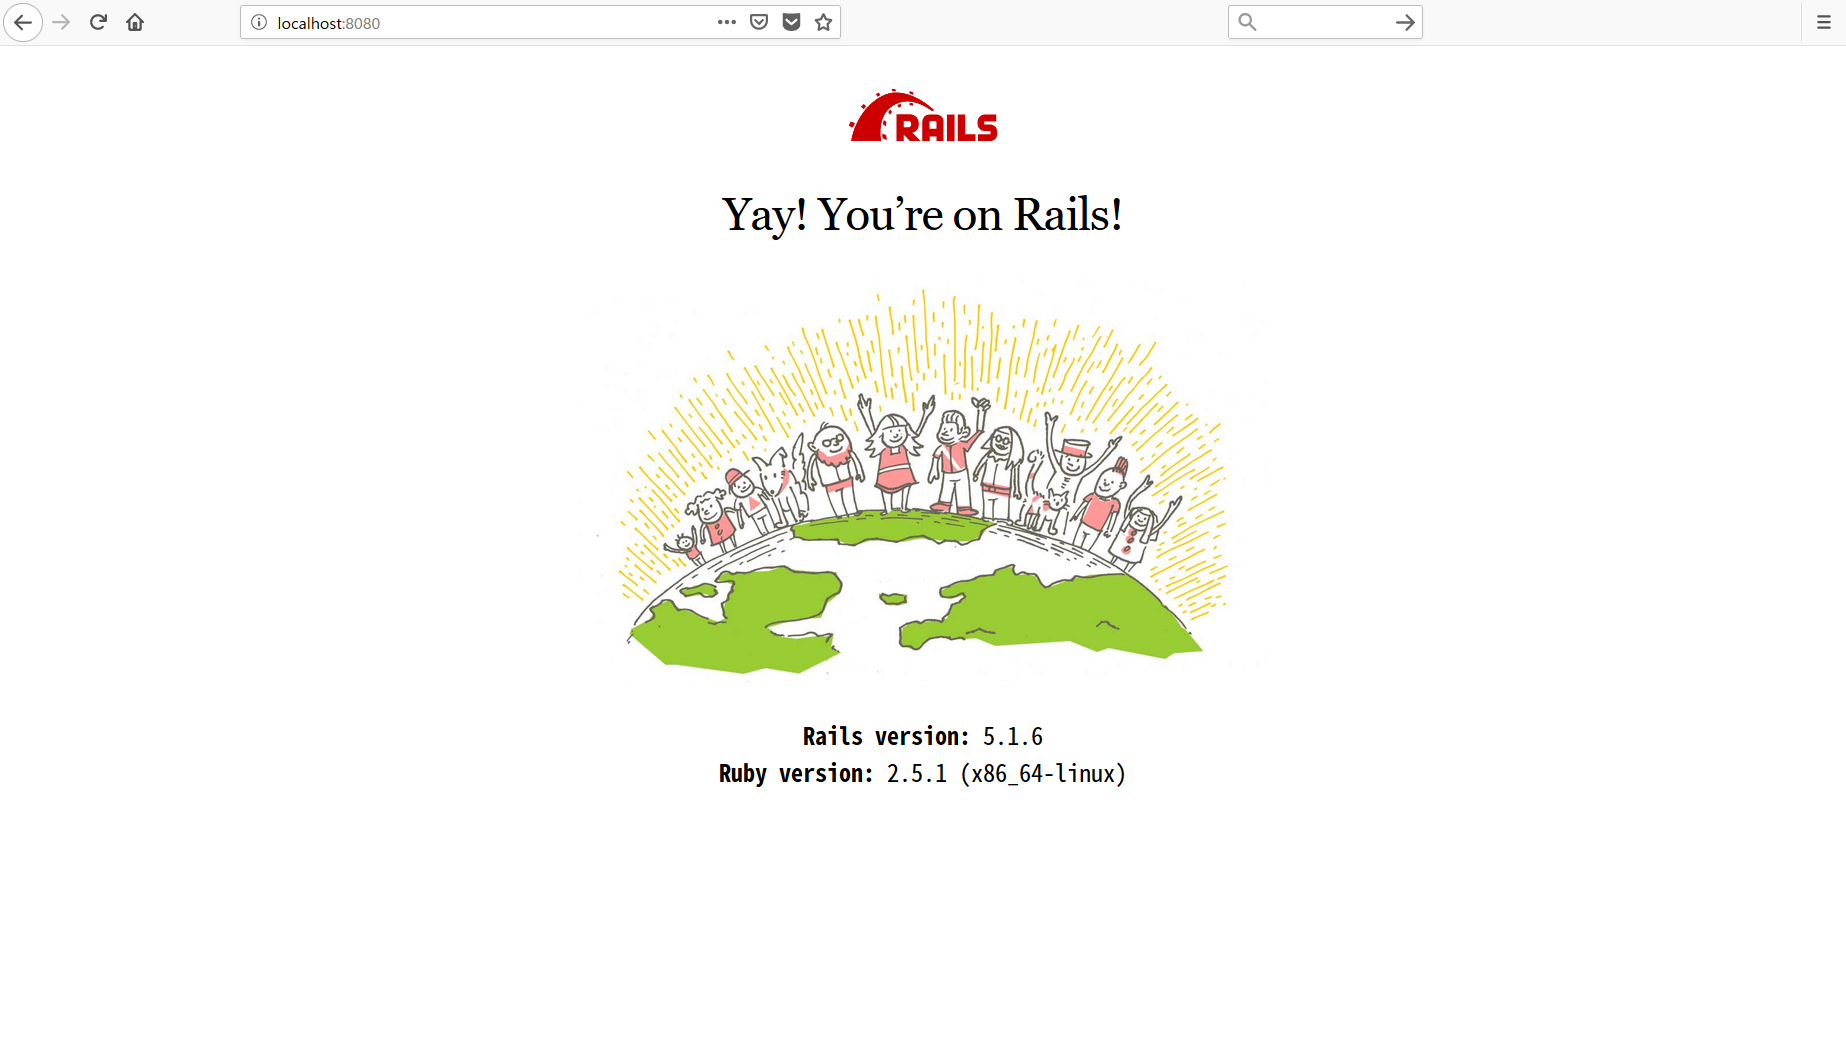 yay_you_re_on_rails.png